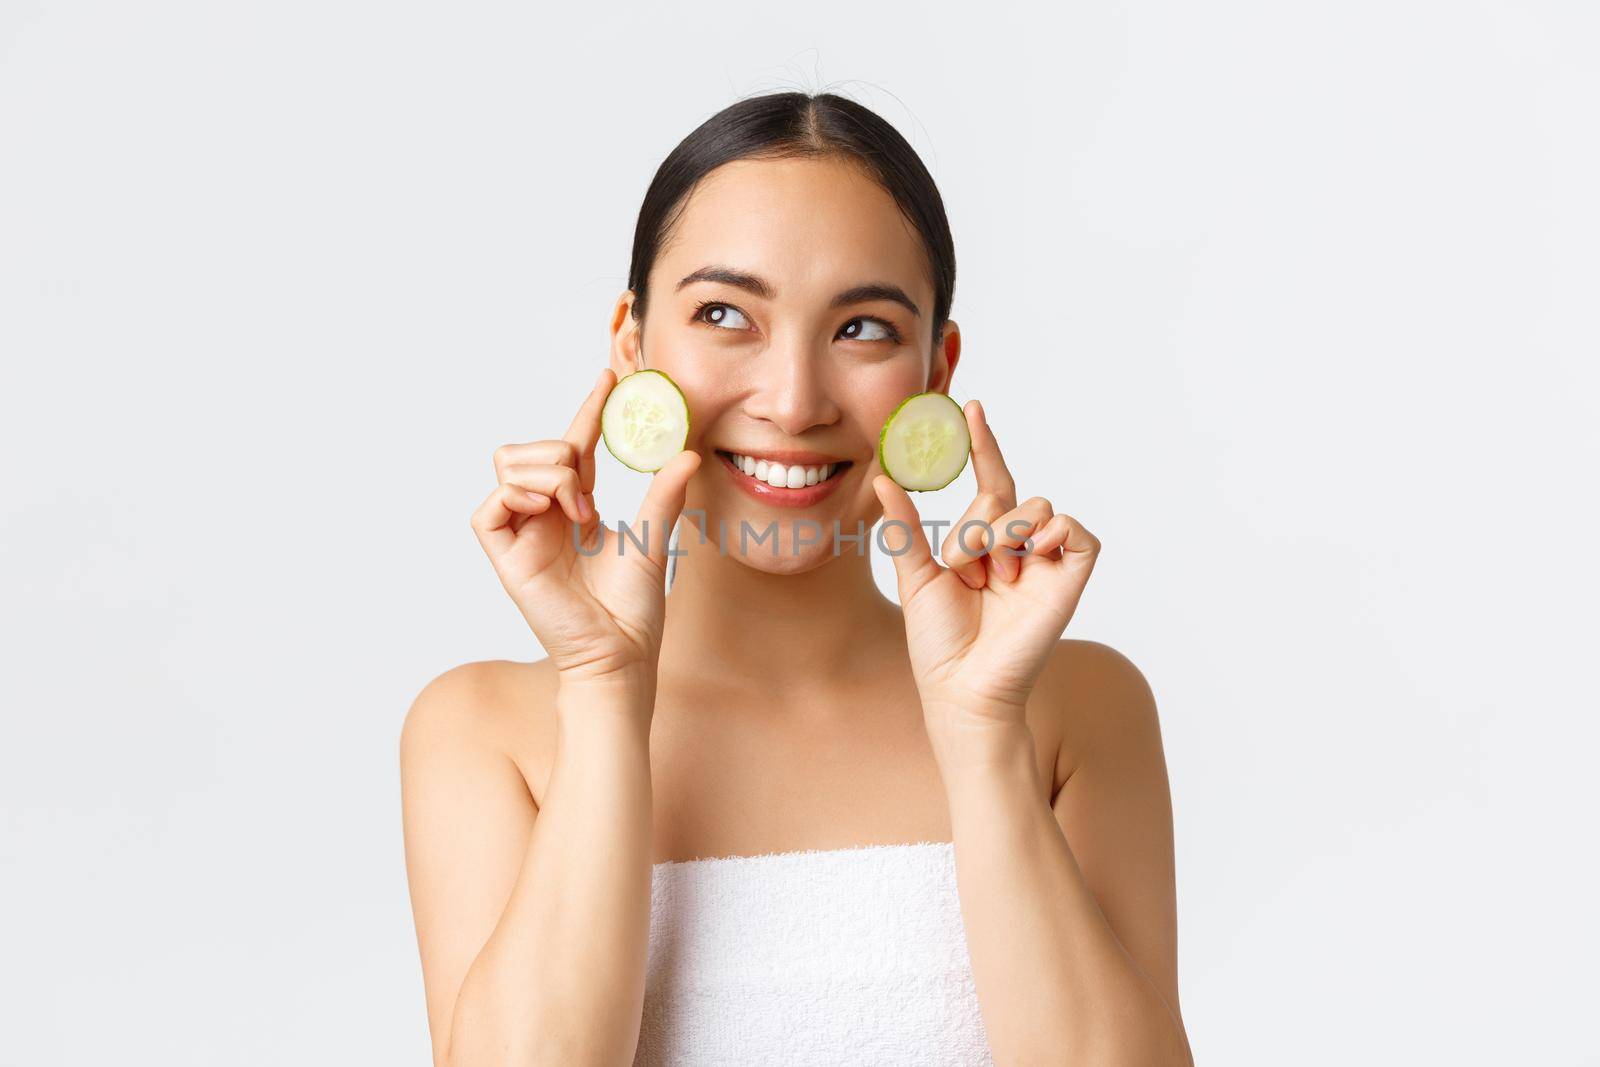 Beauty, personal care, spa salon and skincare concept. Beautiful young asian female in bath towel holding cucumbers and smiling, promo of facial or body treatment, moisturizing features of cream.